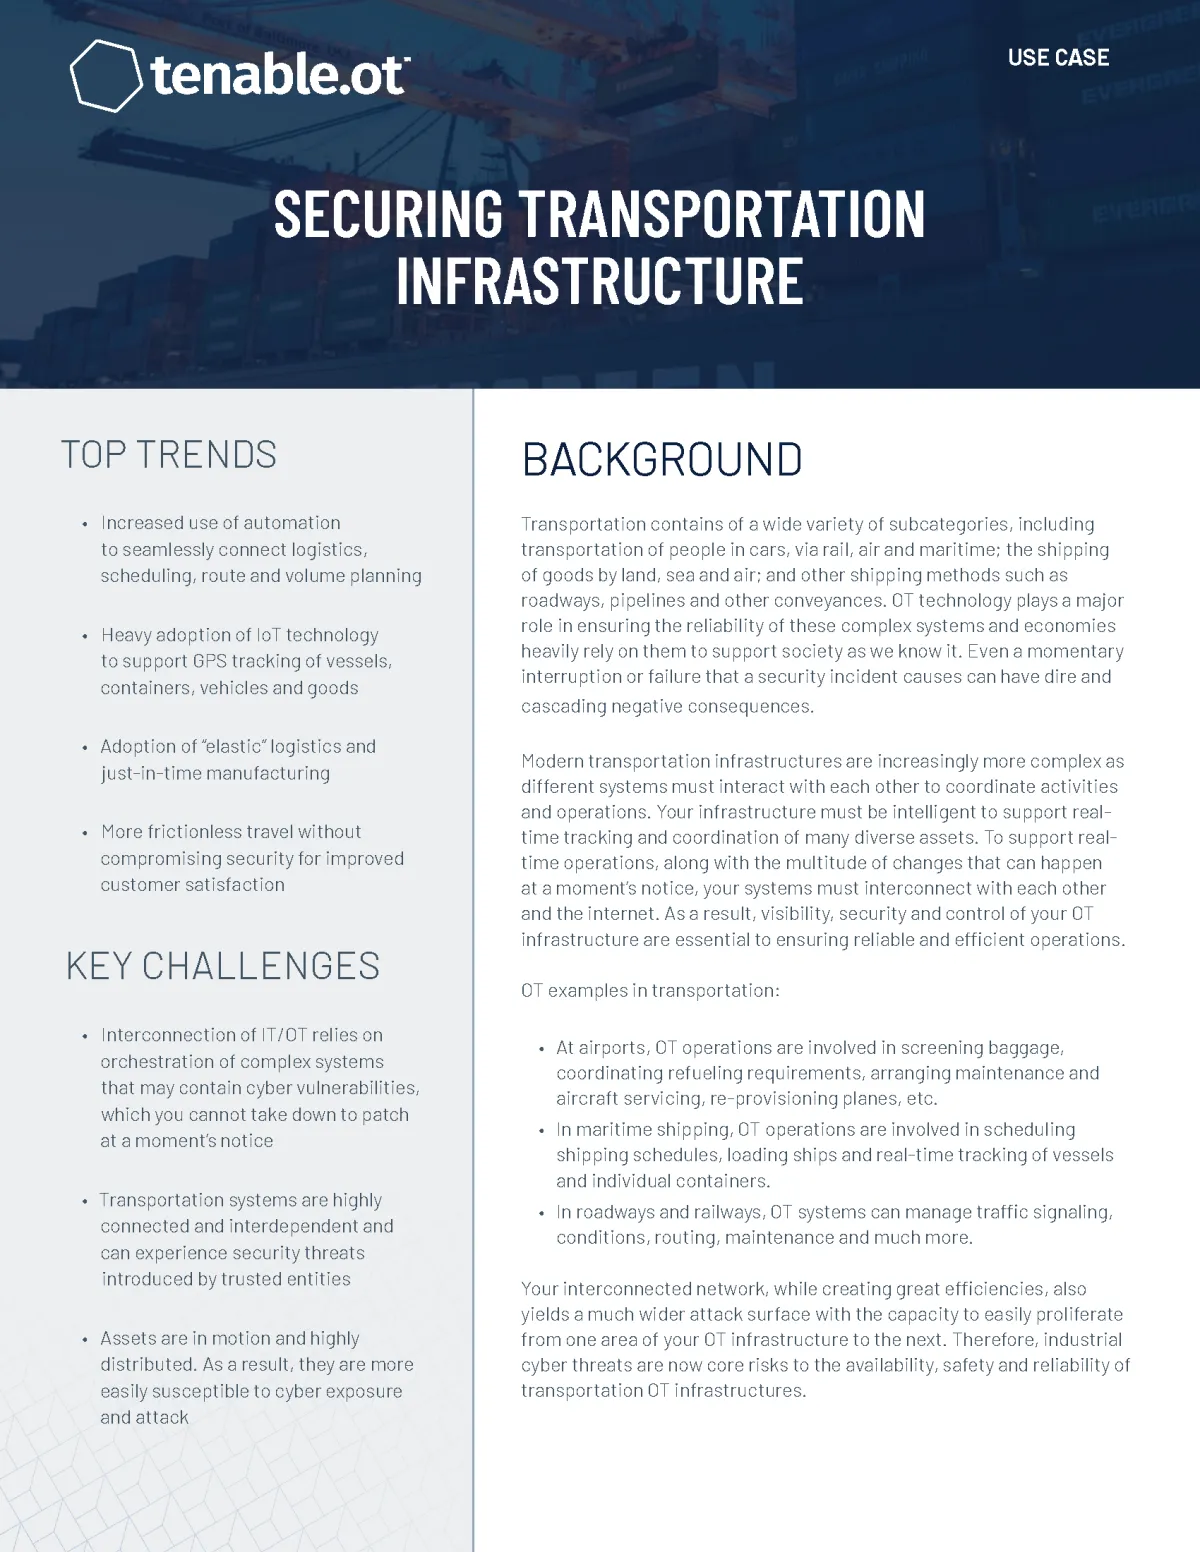 Use Case: Tenable.ot - Securing Transportation Infrastructure